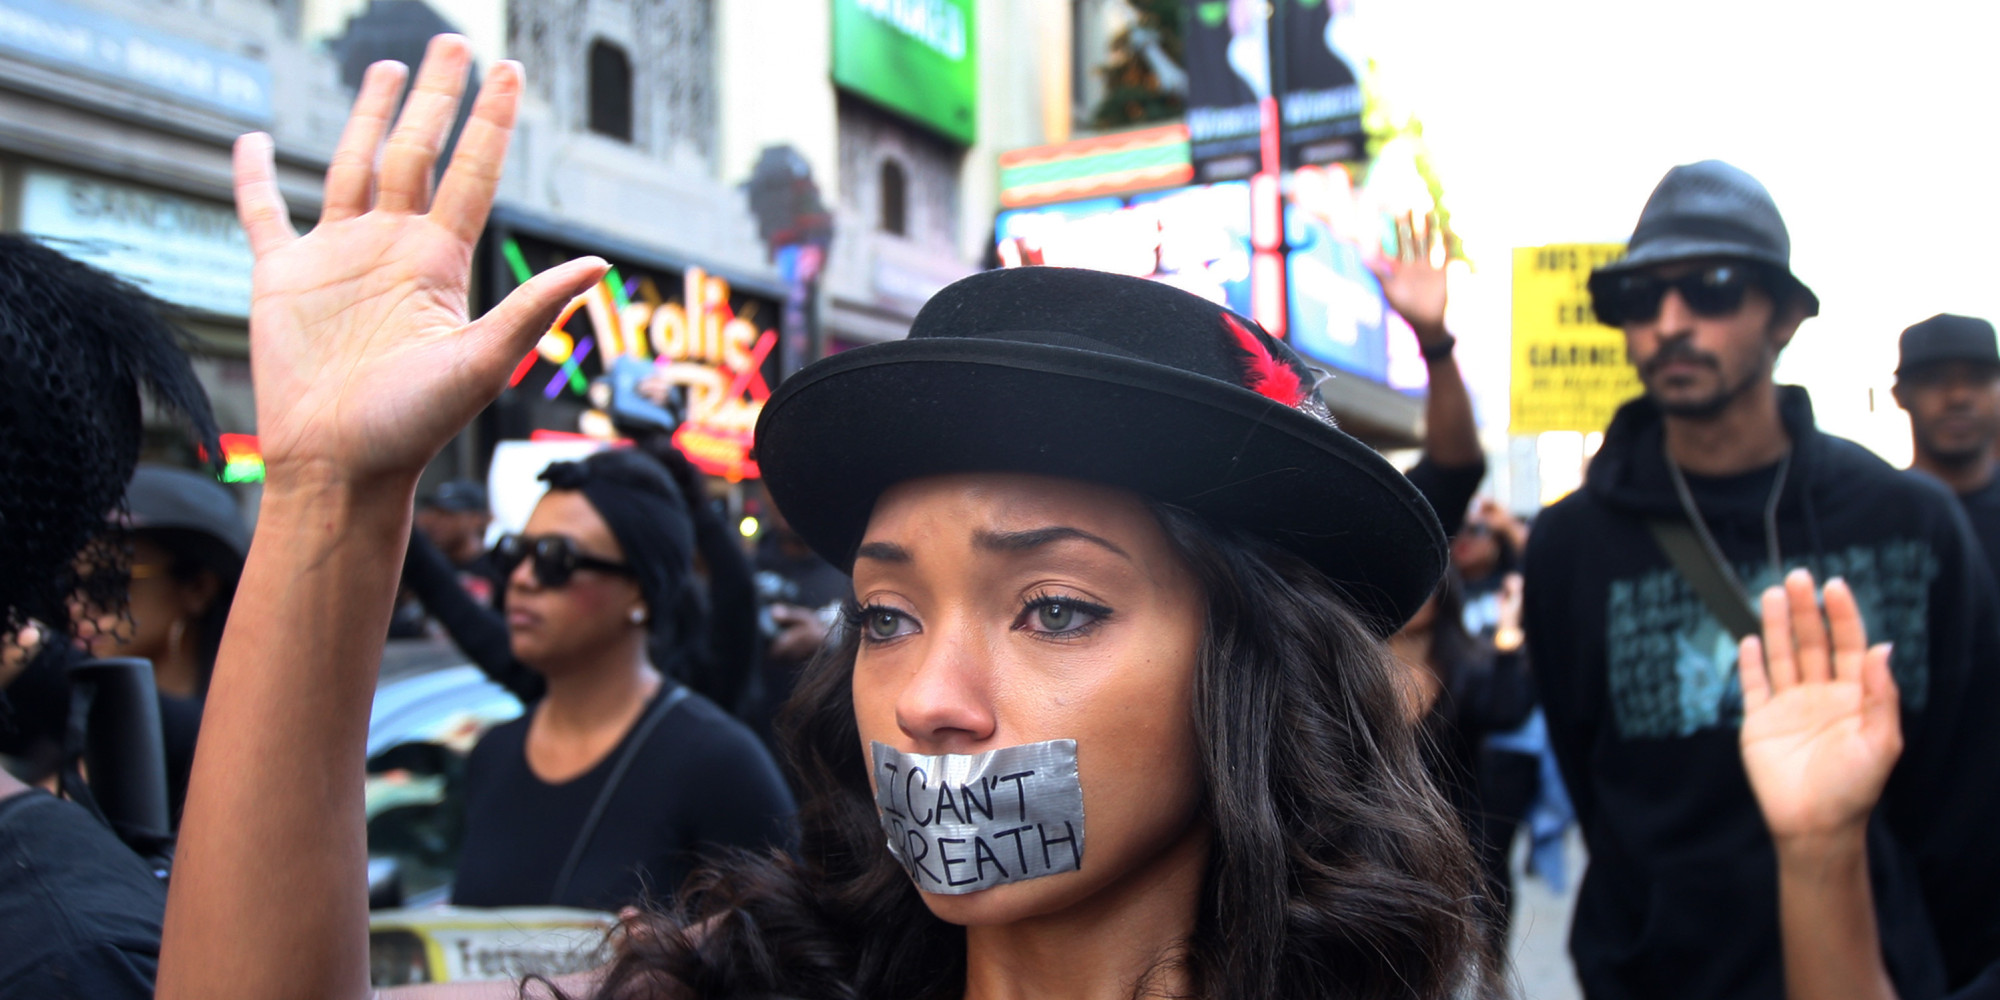 LOS ANGELES, CA - DECEMBER 6:  People march on Hollywood Boulevard in protest of the decision in New York not to indict a police officer involved in the choke-hold death of Eric Garner on December 6, 2014 in the Hollywood section of Los Angeles, California. The march passes the tourist attraction of Hollywood and Highland where, by coincidence, police shot and killed a man in the intersection. Police say that he had a knife.   (Photo by David McNew/Getty Images)